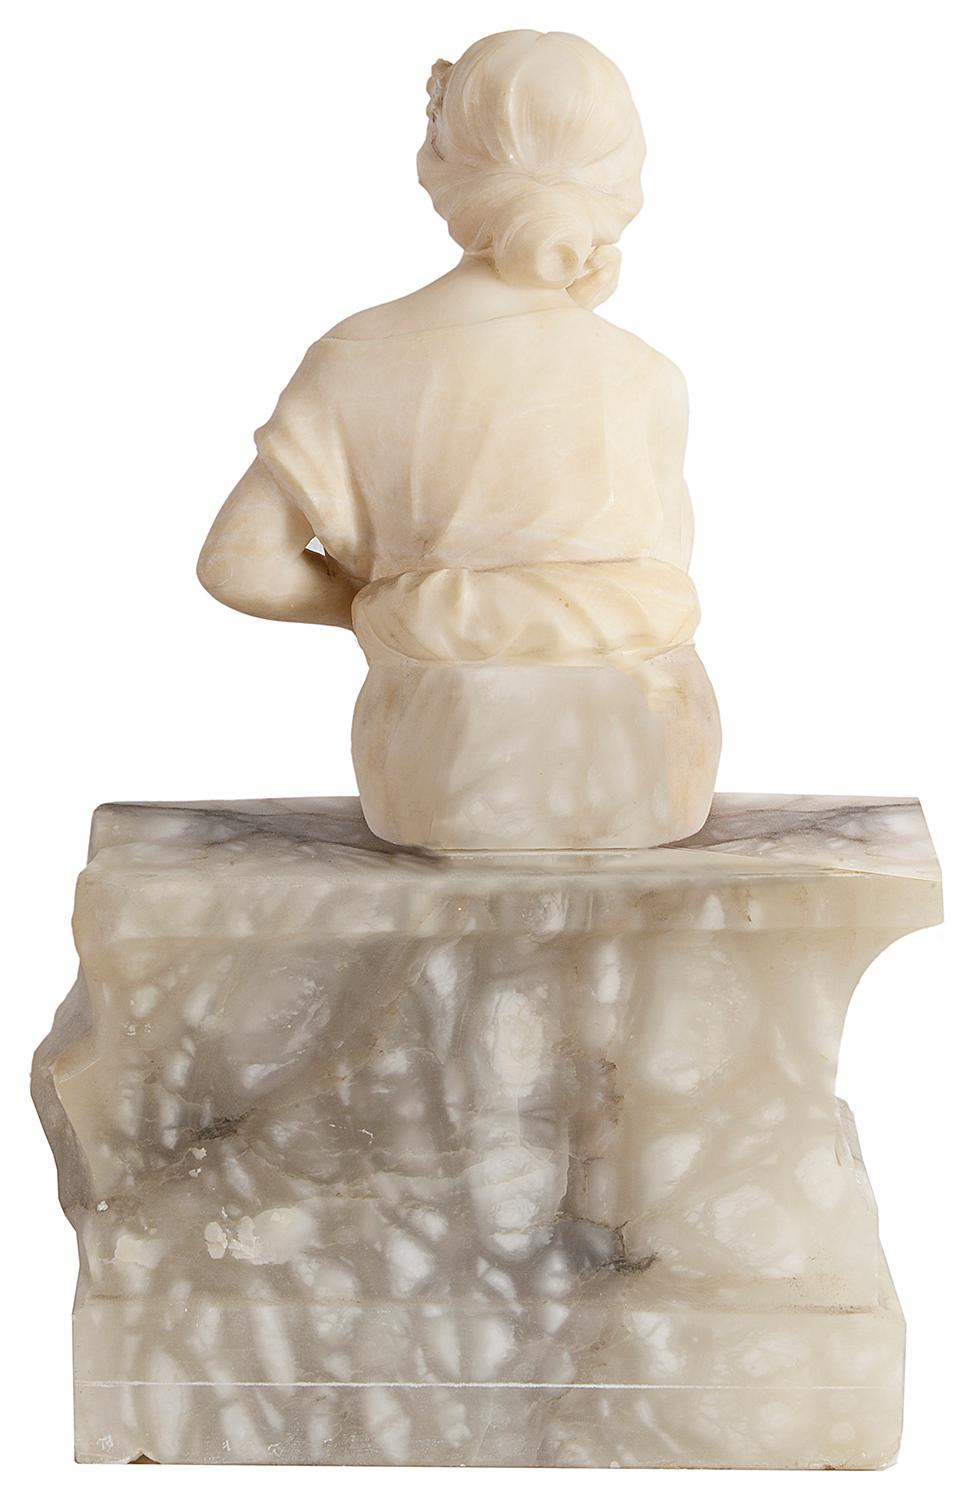 Romantic Alabaster Statue of Young Seated Girl, 19th Century